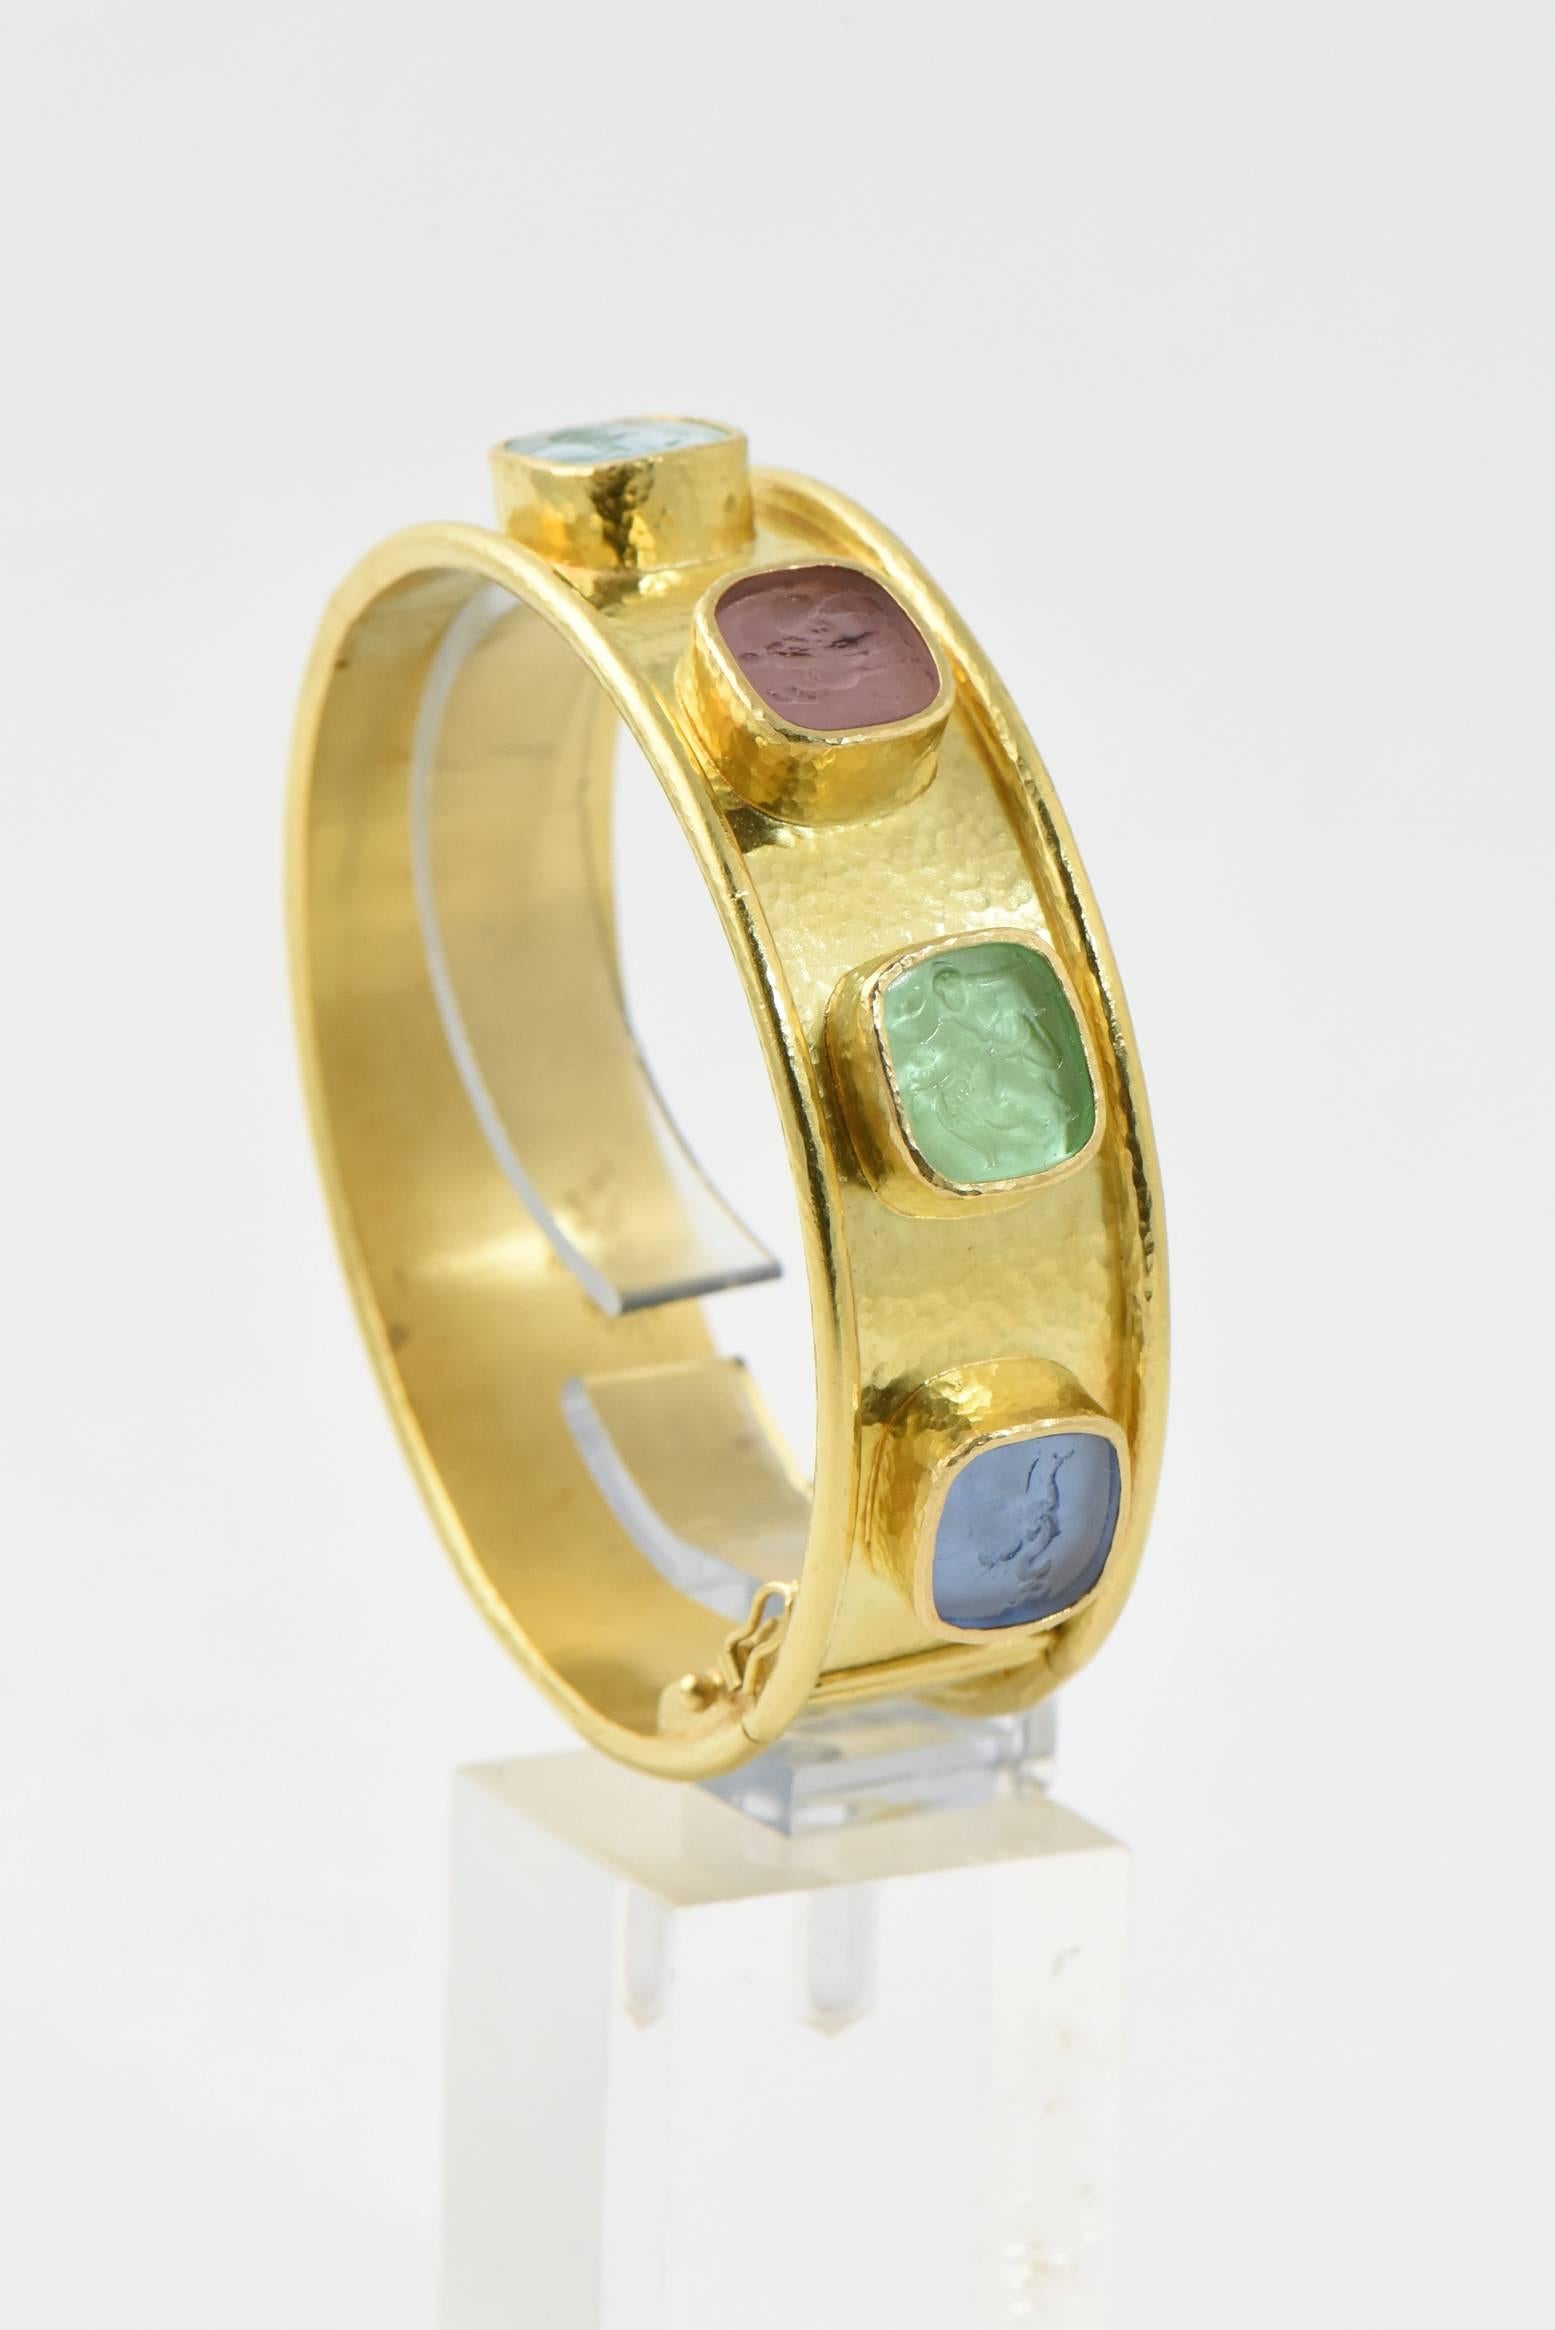 Individually designed by Elizabeth Locke and handcrafted in 19-karat yellow gold, this Venetian glass bracelet modernizes the time-honored intaglio tradition. Though intaglios historically have practical purpose as stamps or seals, this Elizabeth